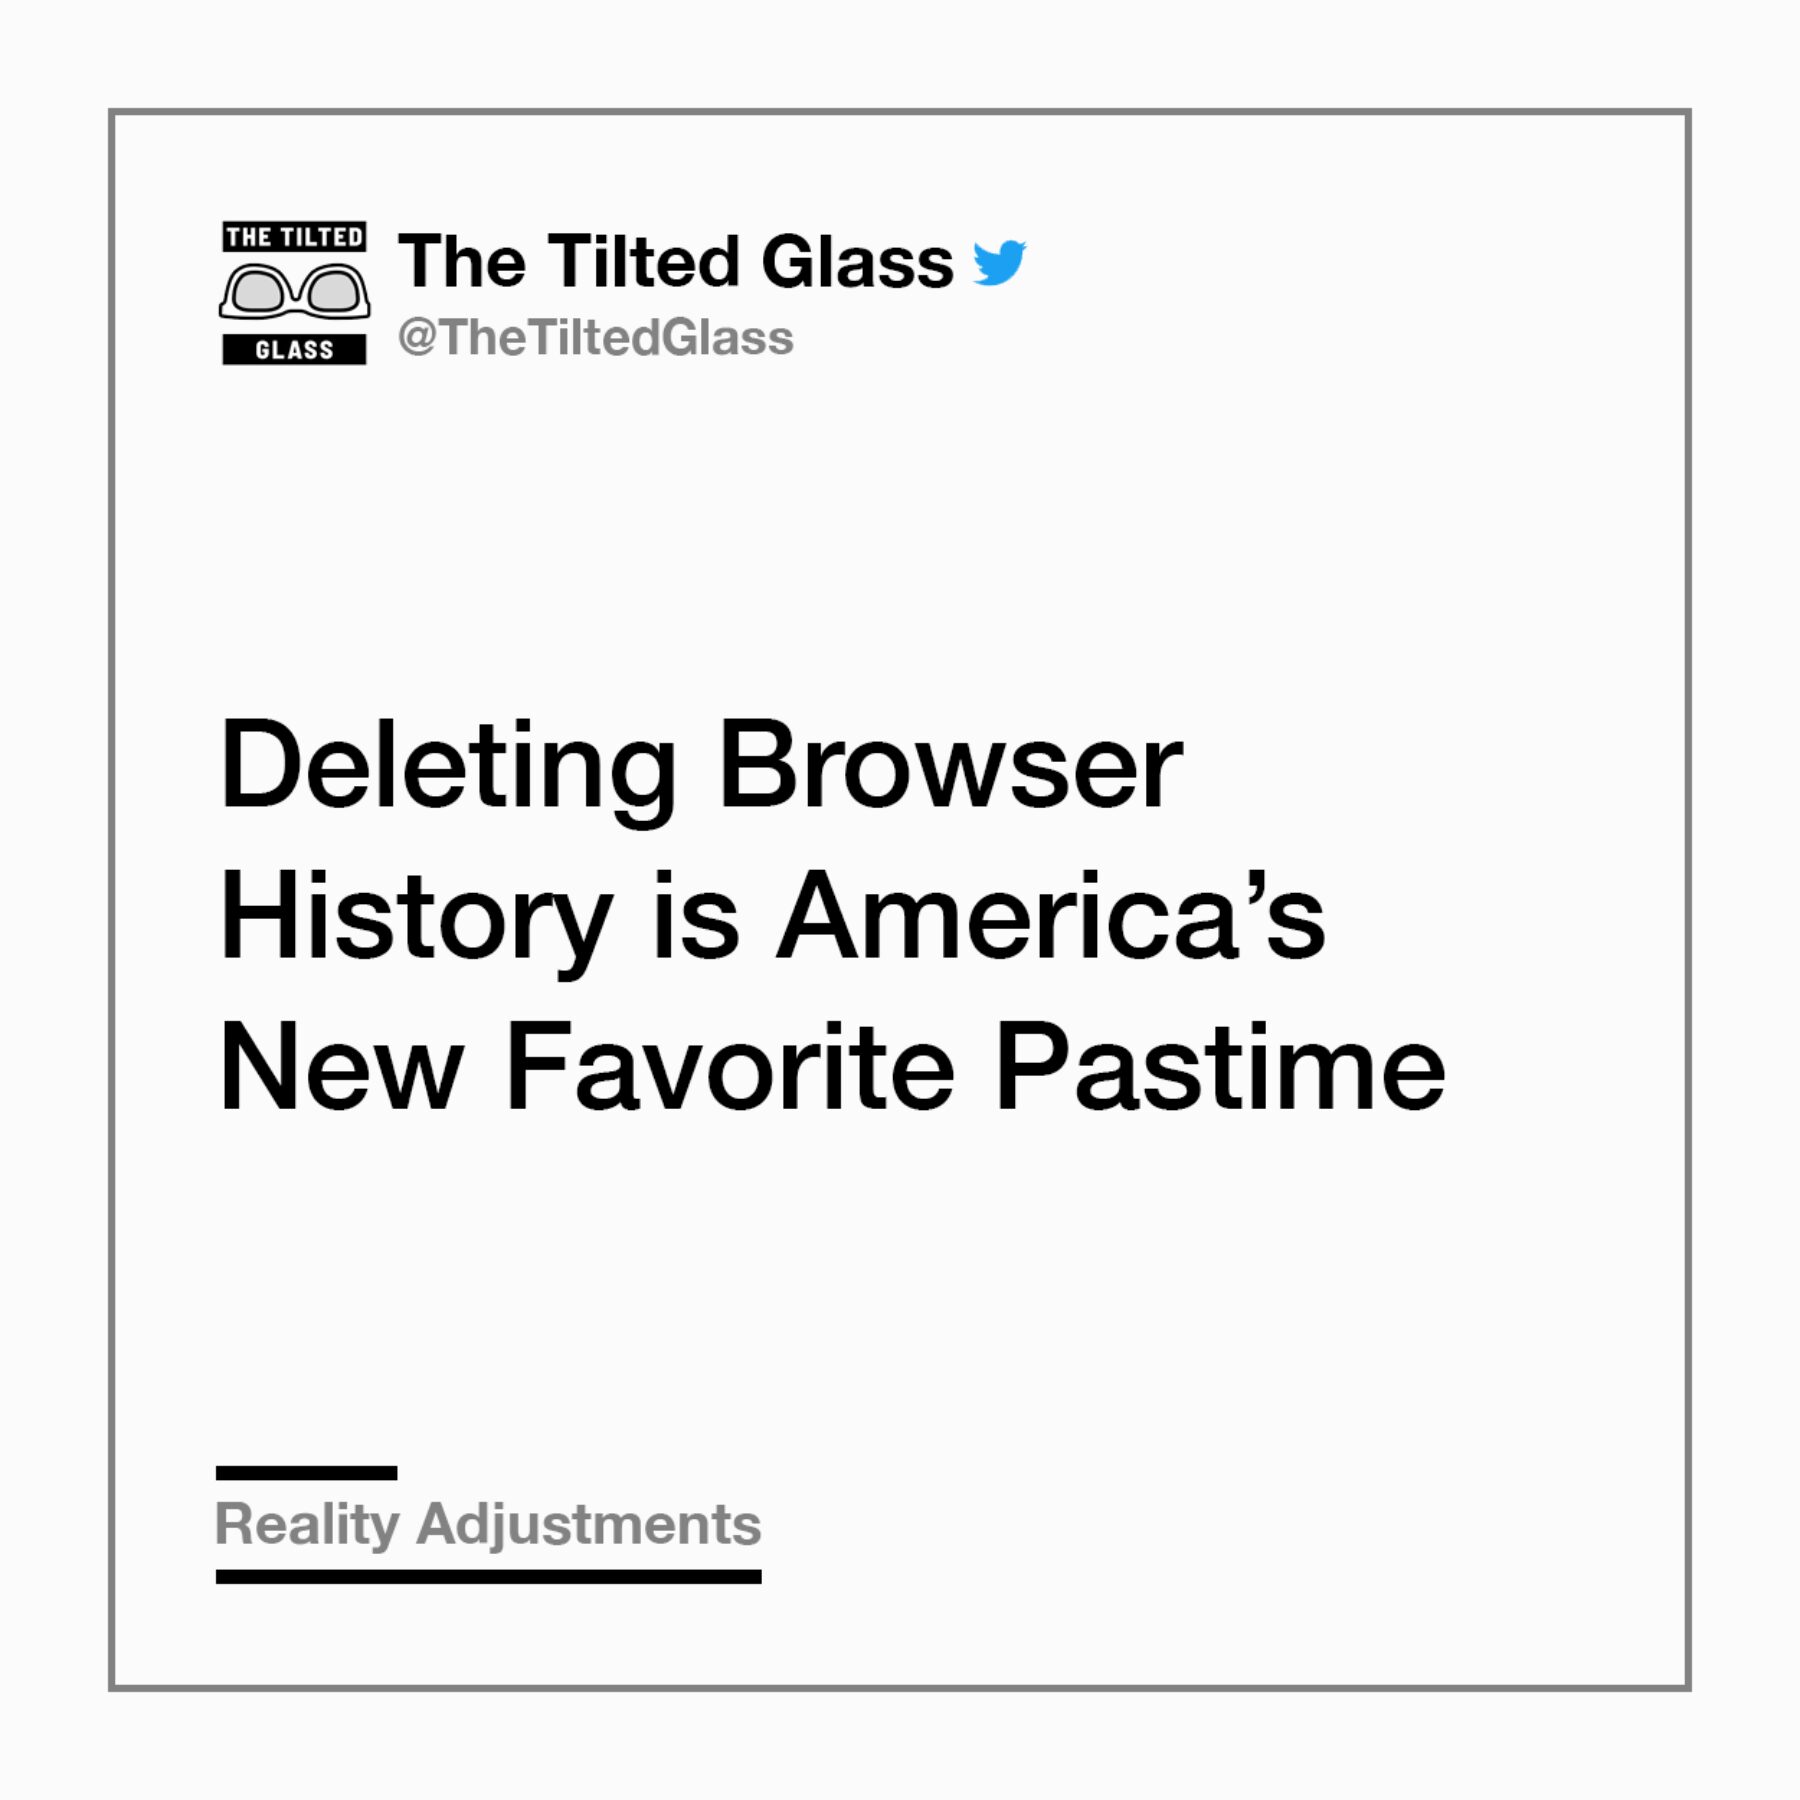 Deleting Browser History is America’s New Favorite Pastime